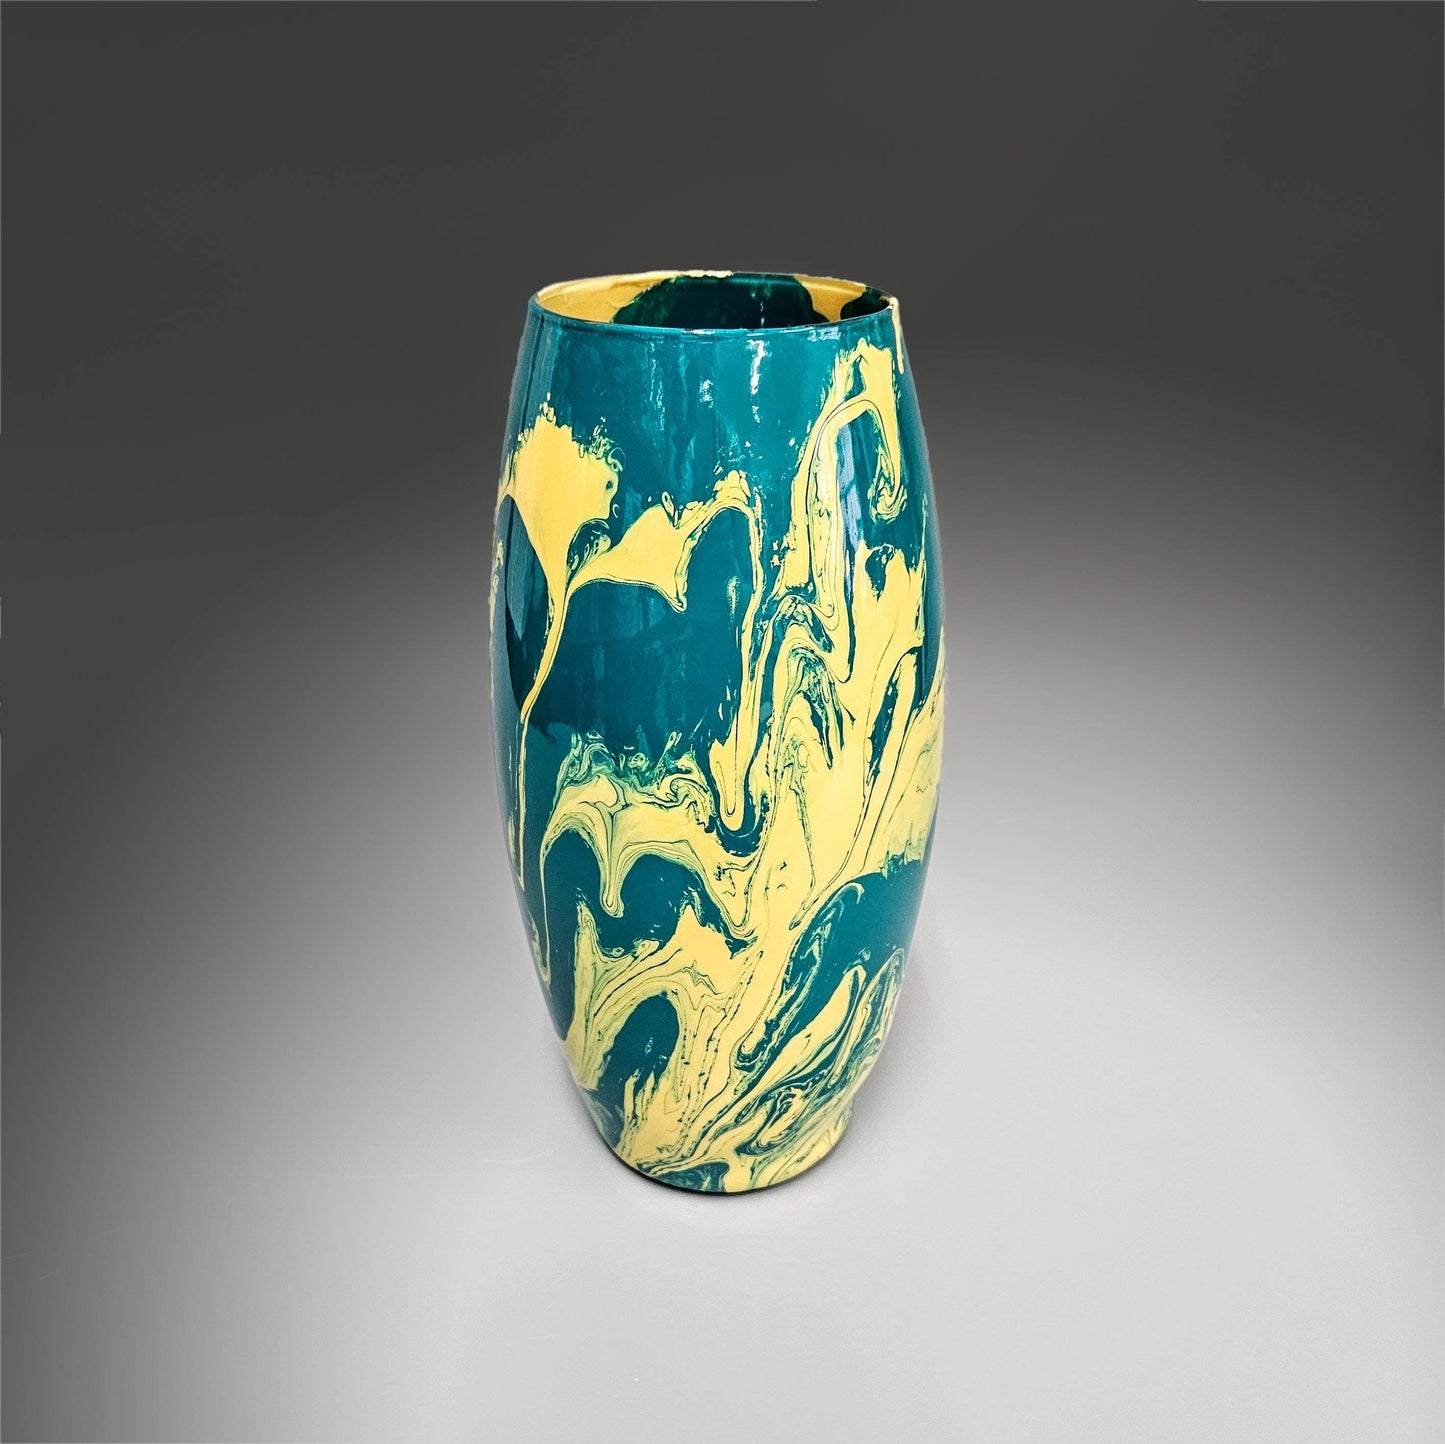 Abstract Teal and Tan Yellow Glass Vase